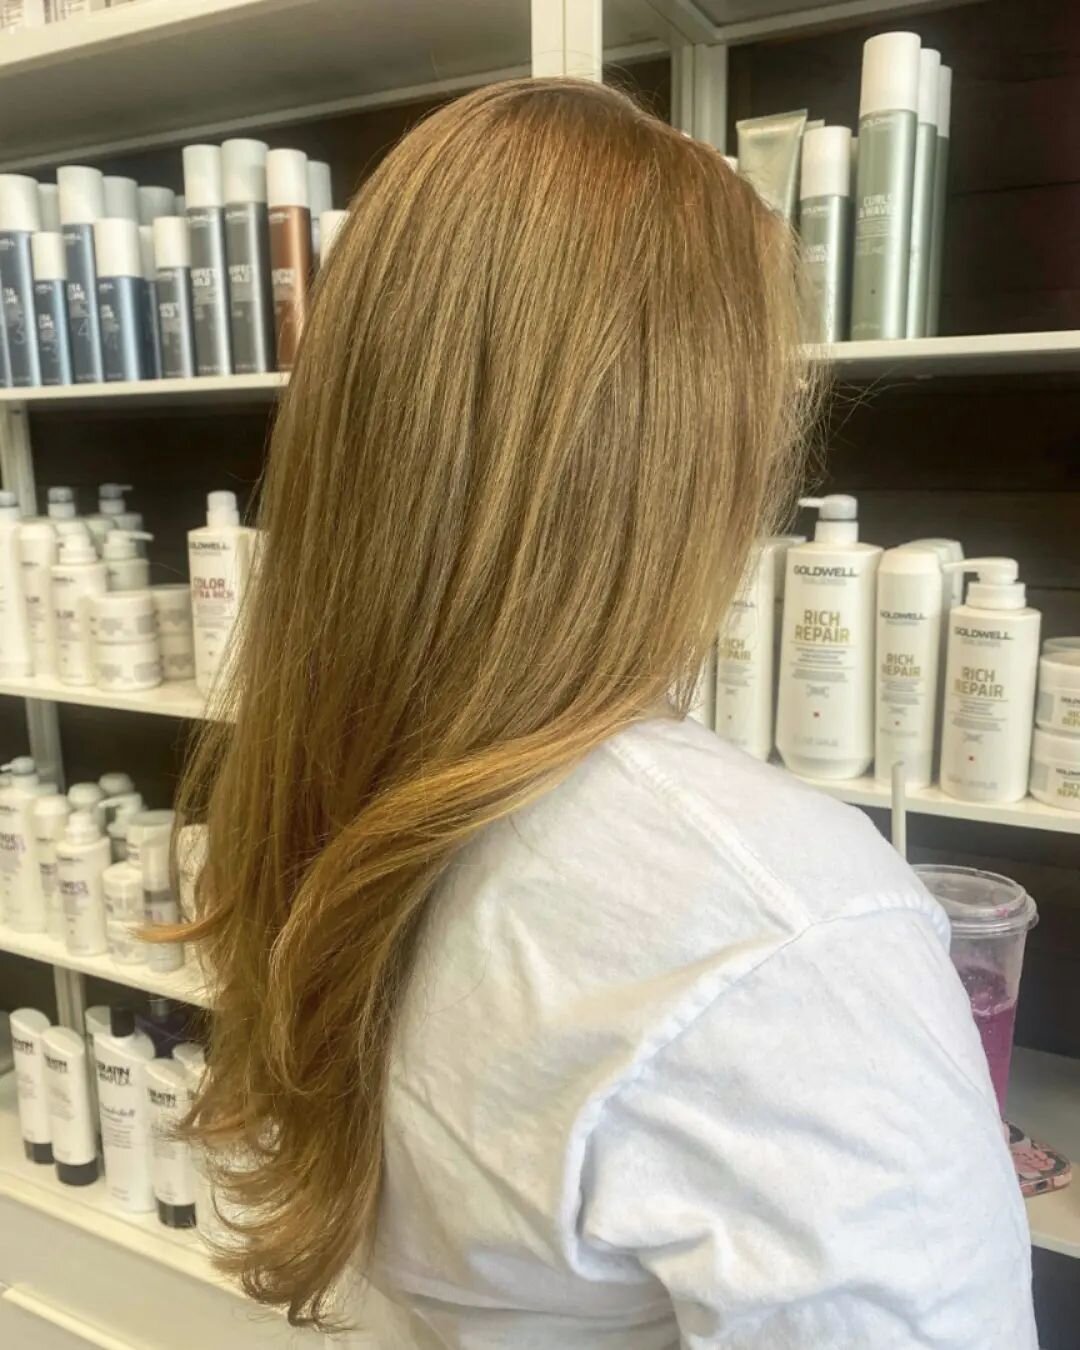 A great clean up and style by Brooke @brookealevatohair 😍
.
.
.
#haircut #longlayers #newtalent #goldwell #baltimoresalon #baltimorehairstylist #baltimorehair